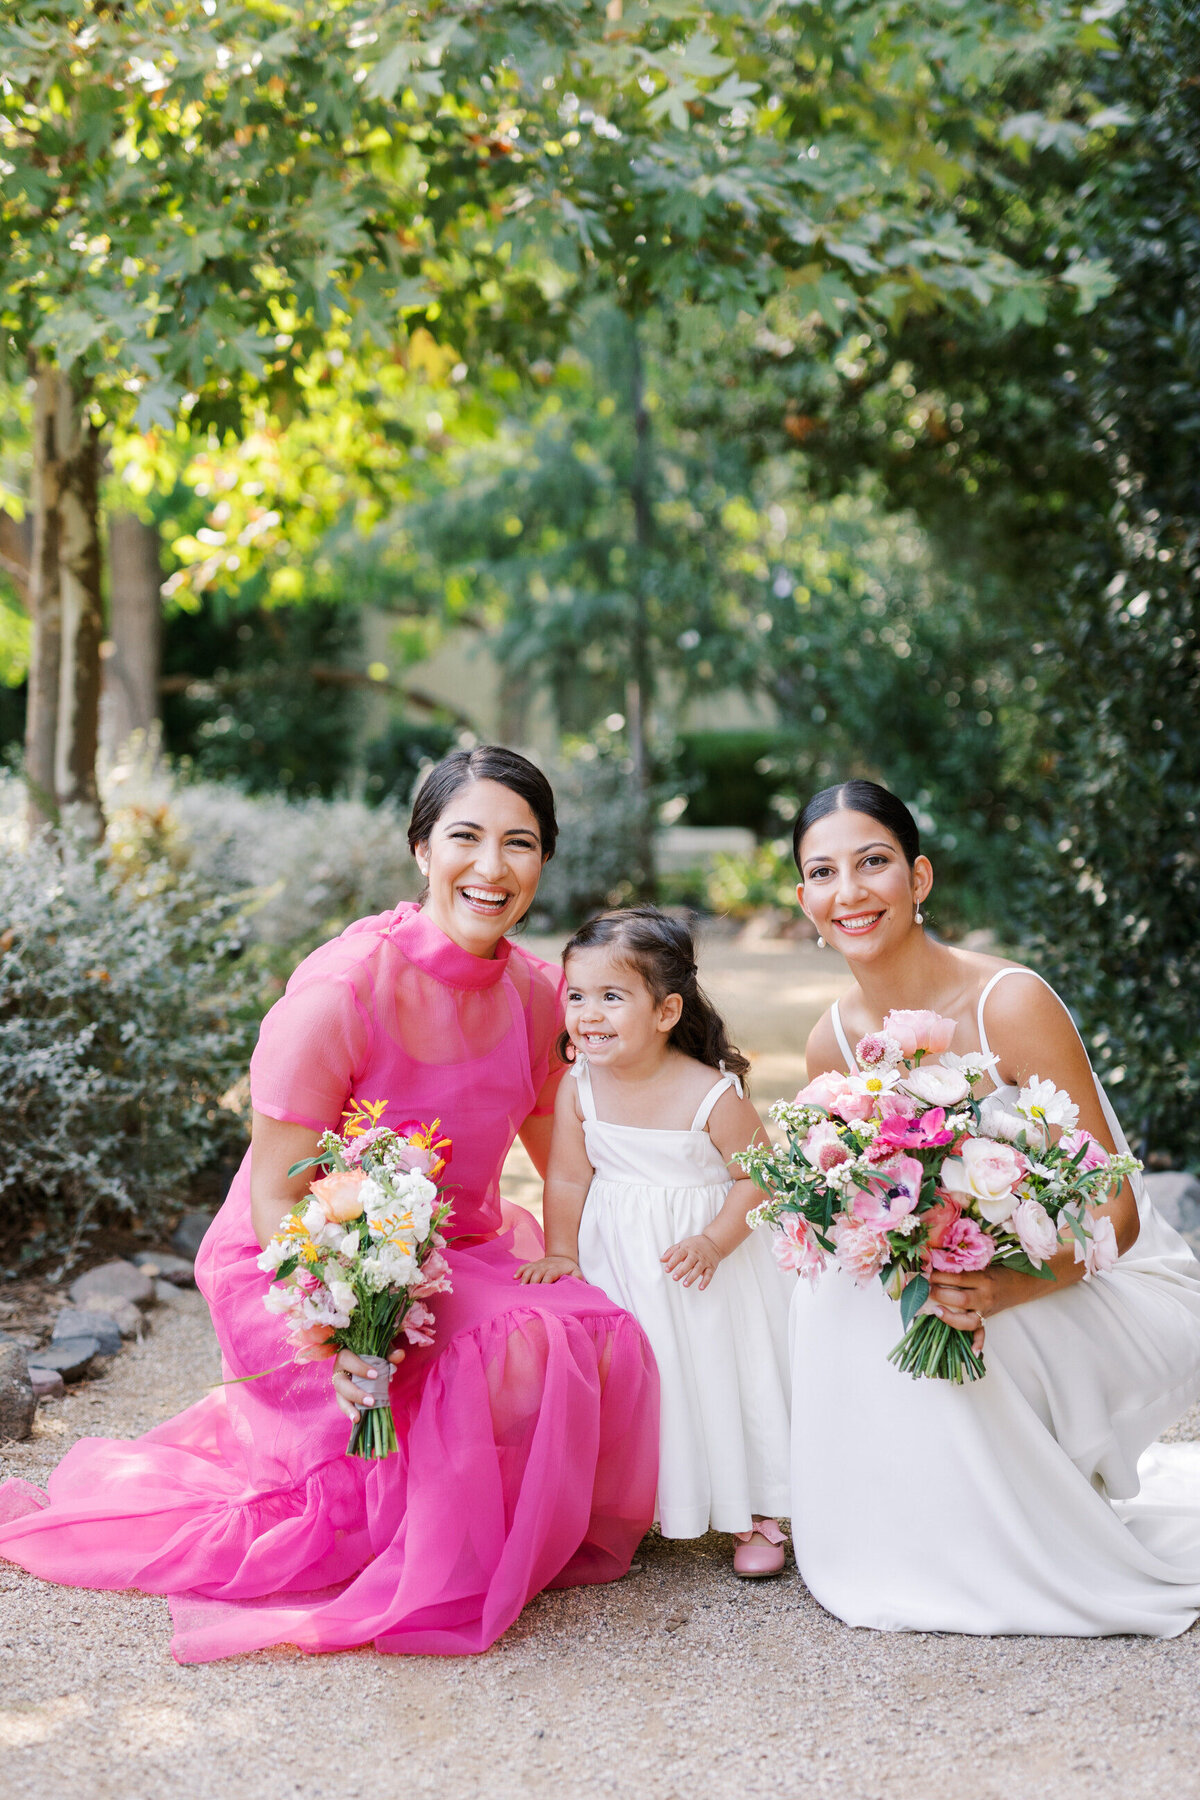 Angelica Marie Photography_Natalie Pirzad and Gordon Stewart Wedding_September 2022_The Lodge at Malibou Lake Wedding_Malibu Wedding Photographer_592